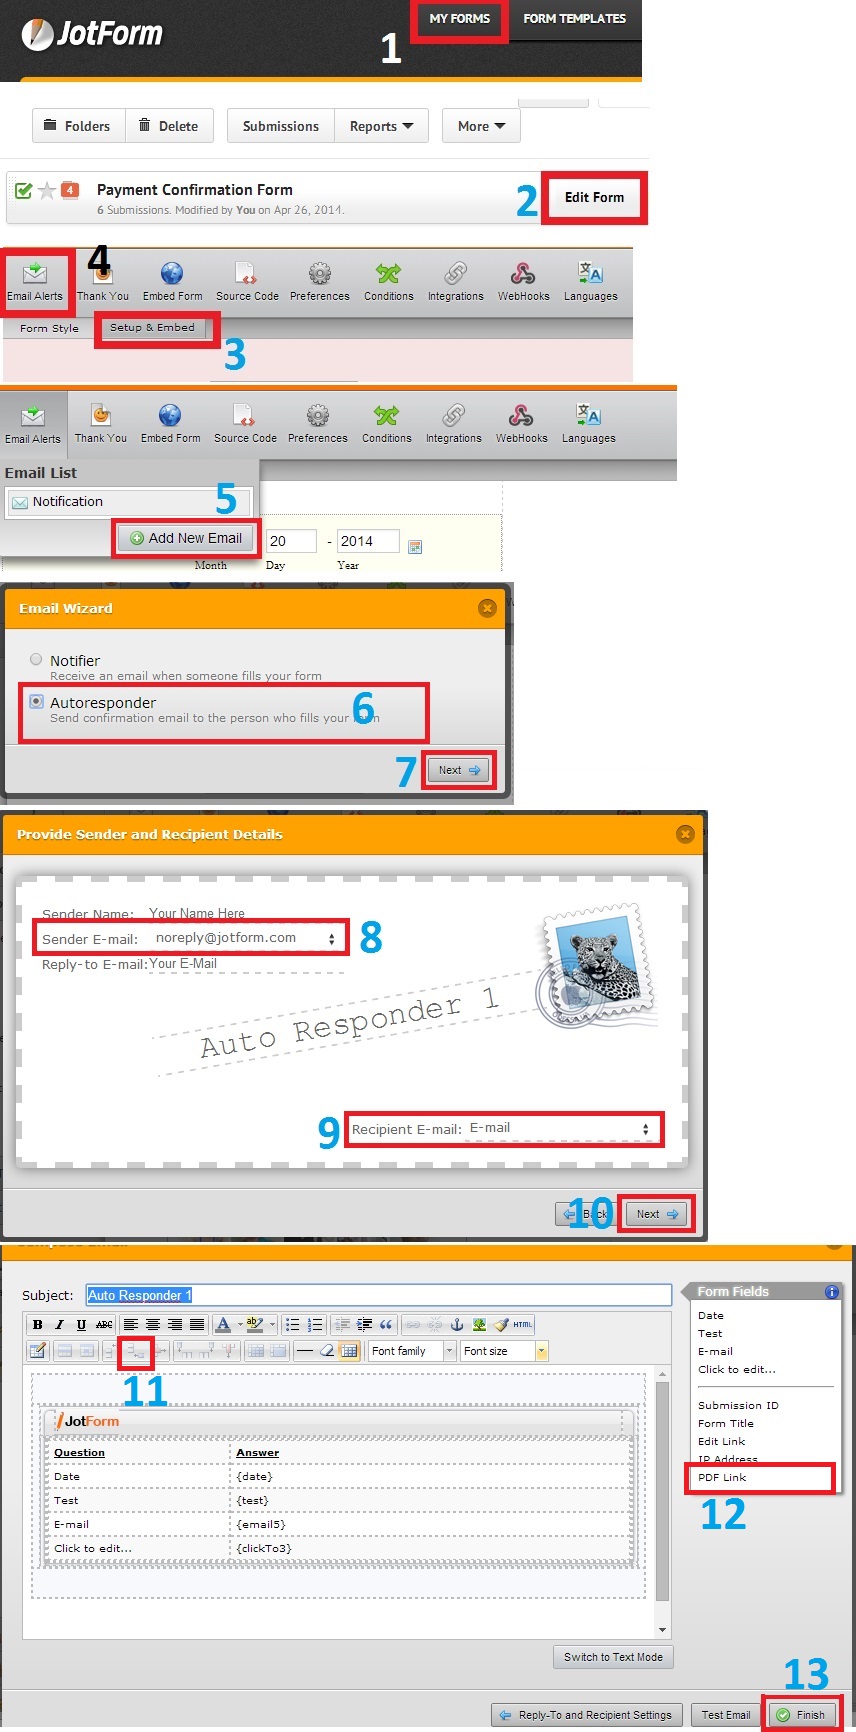 how to add a pdf to a form so it can be printed out by the individual adding a submission Image 1 Screenshot 20